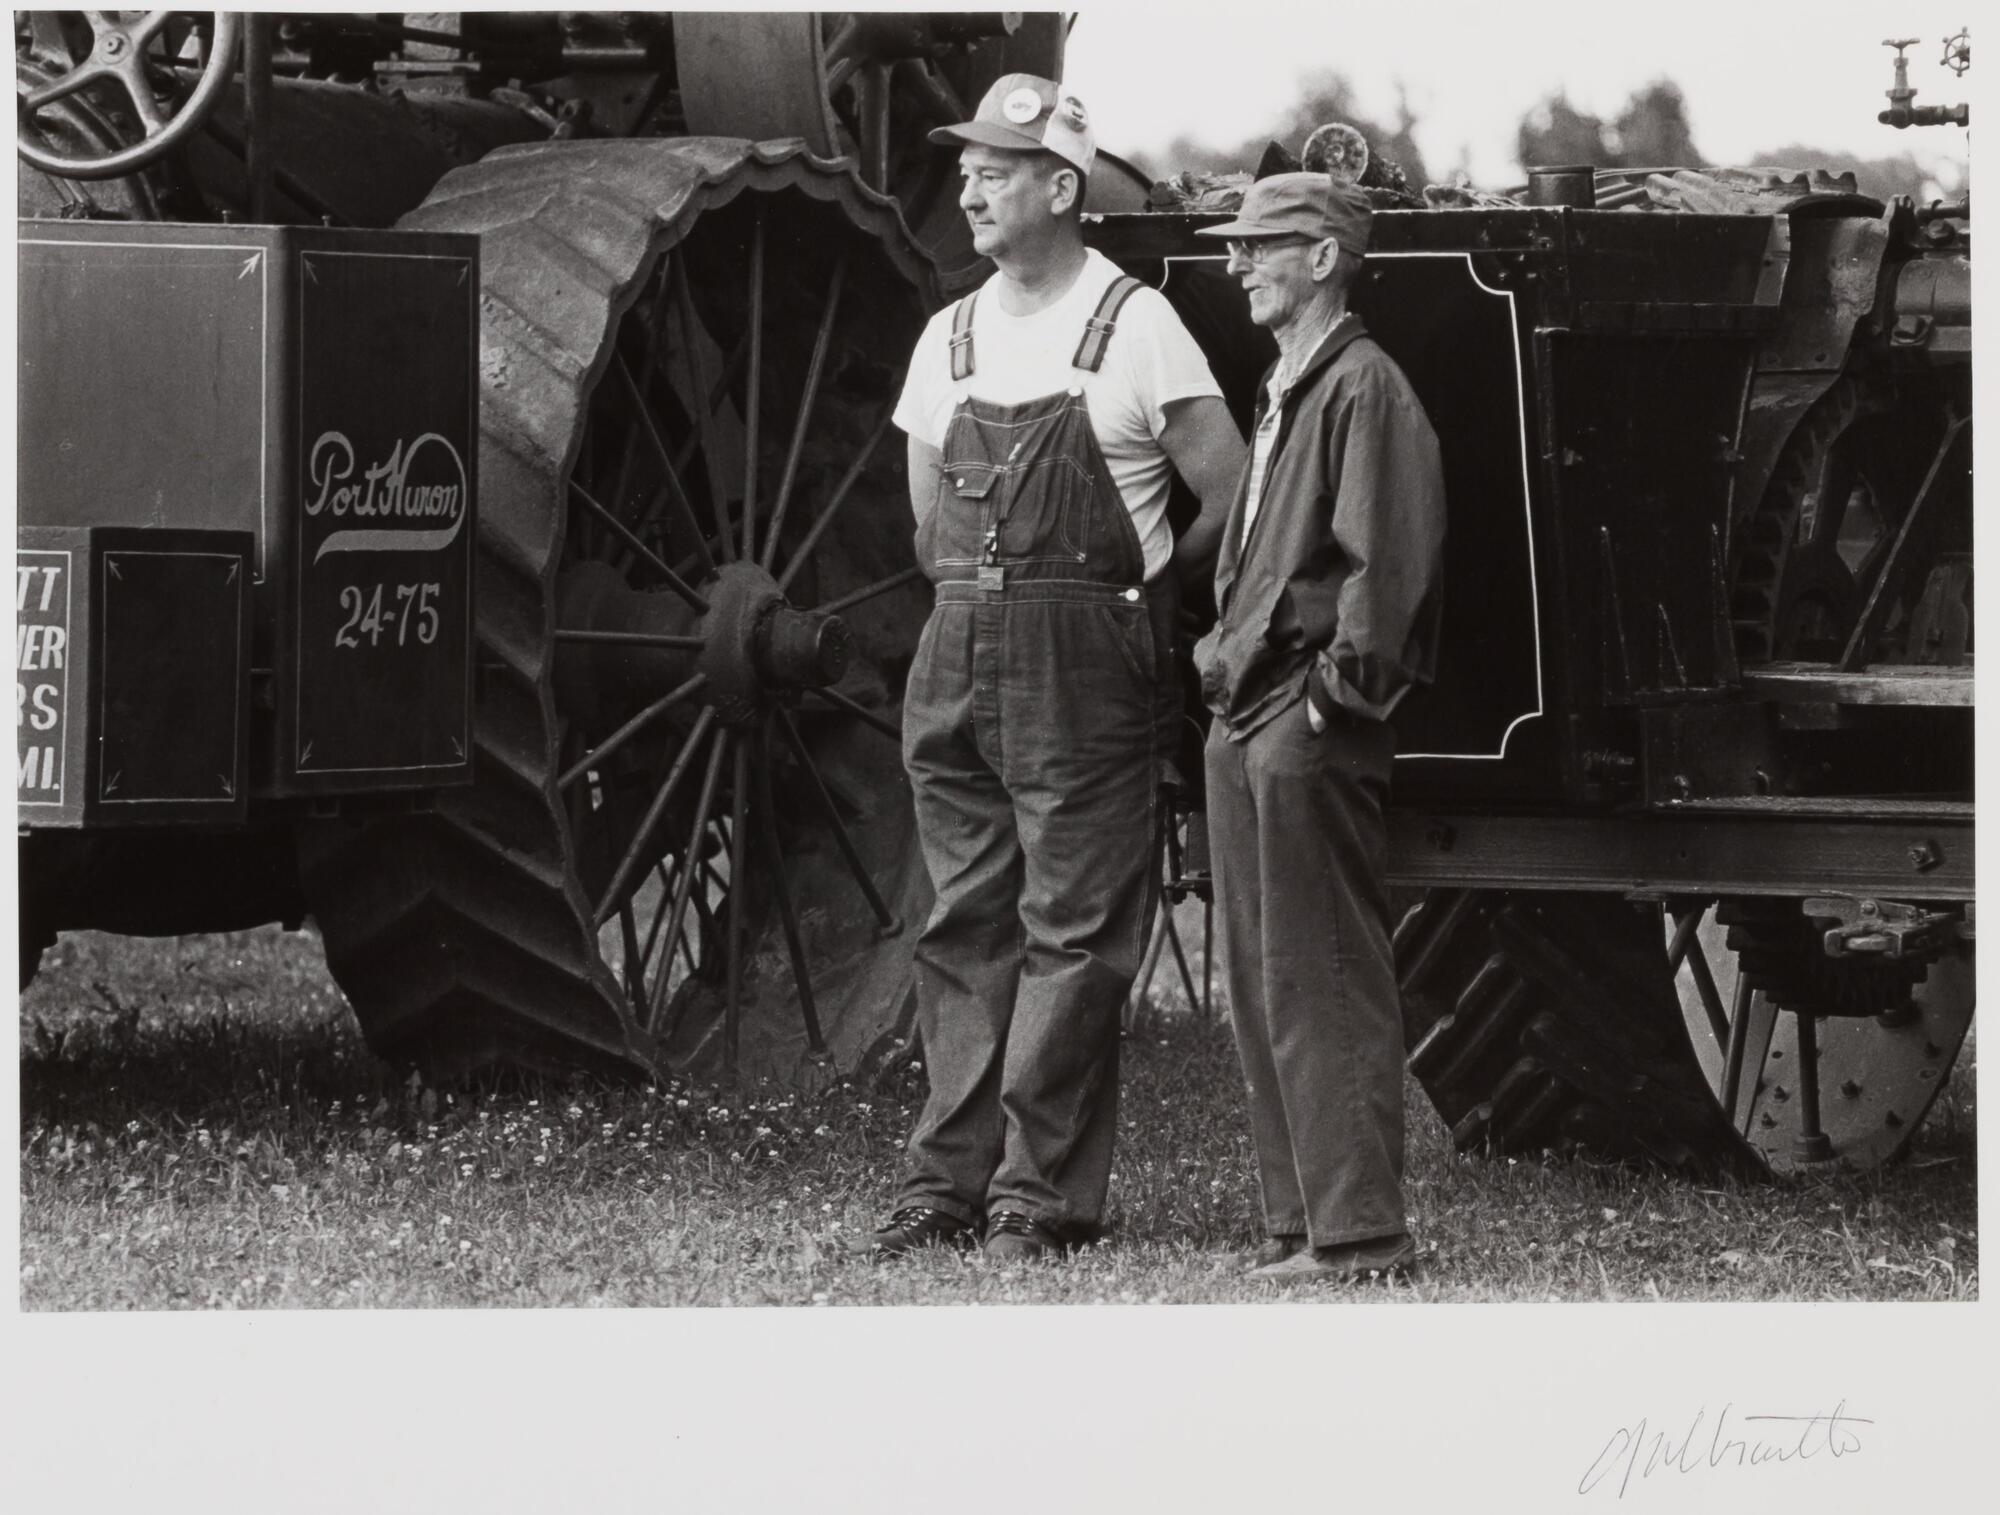 Two farmers standing next to a large tractor, one in overalls with his hands behind his back, the other in a dark jacket with his hands in his pockets.